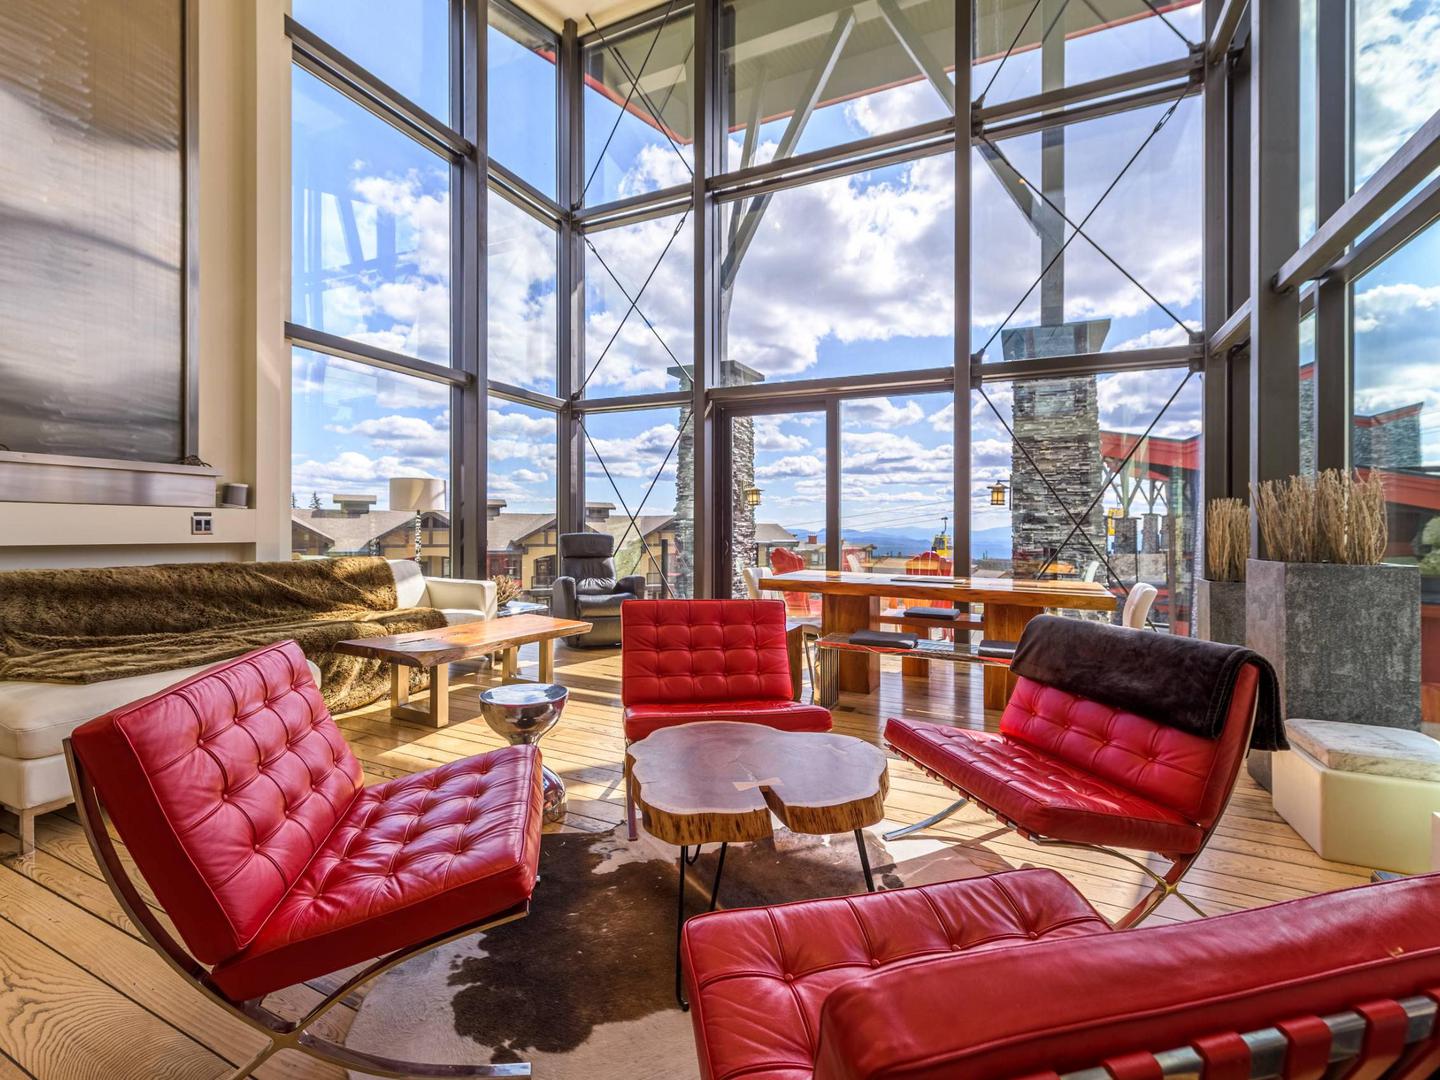 The open concept, modern luxury living room with red leather chairs, huge floor to ceiling windows and hardwood floors in the Edge #7 at Big White Ski Resort.